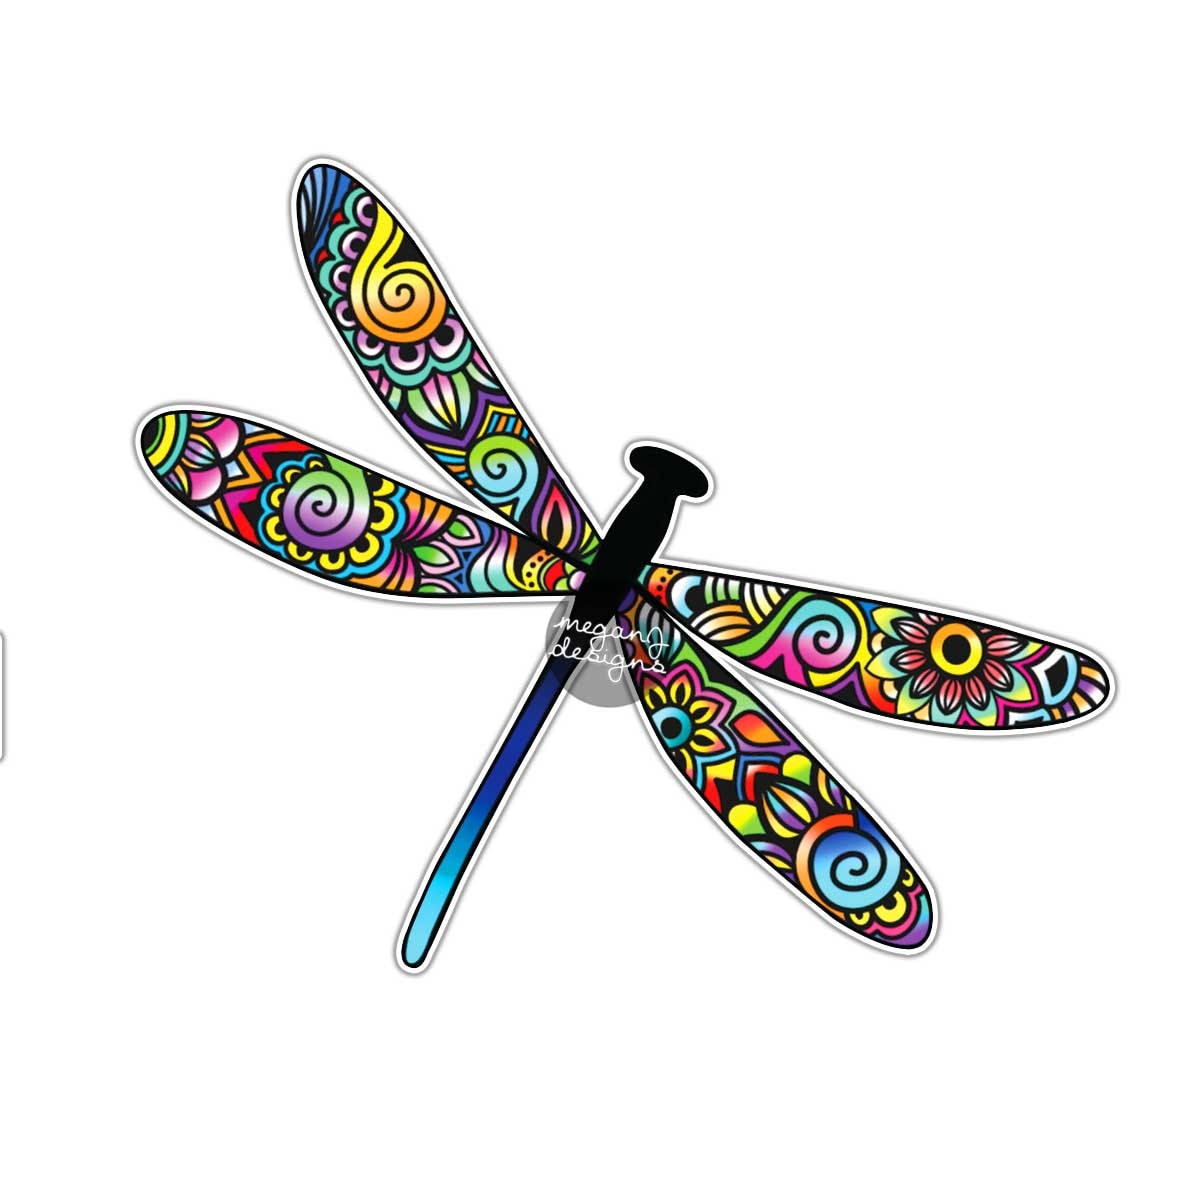 KitchenAid Darling Dragonfly Vinyl Decals- Set of 9 · Vinyl Designs by DW ·  Online Store Powered by Storenvy